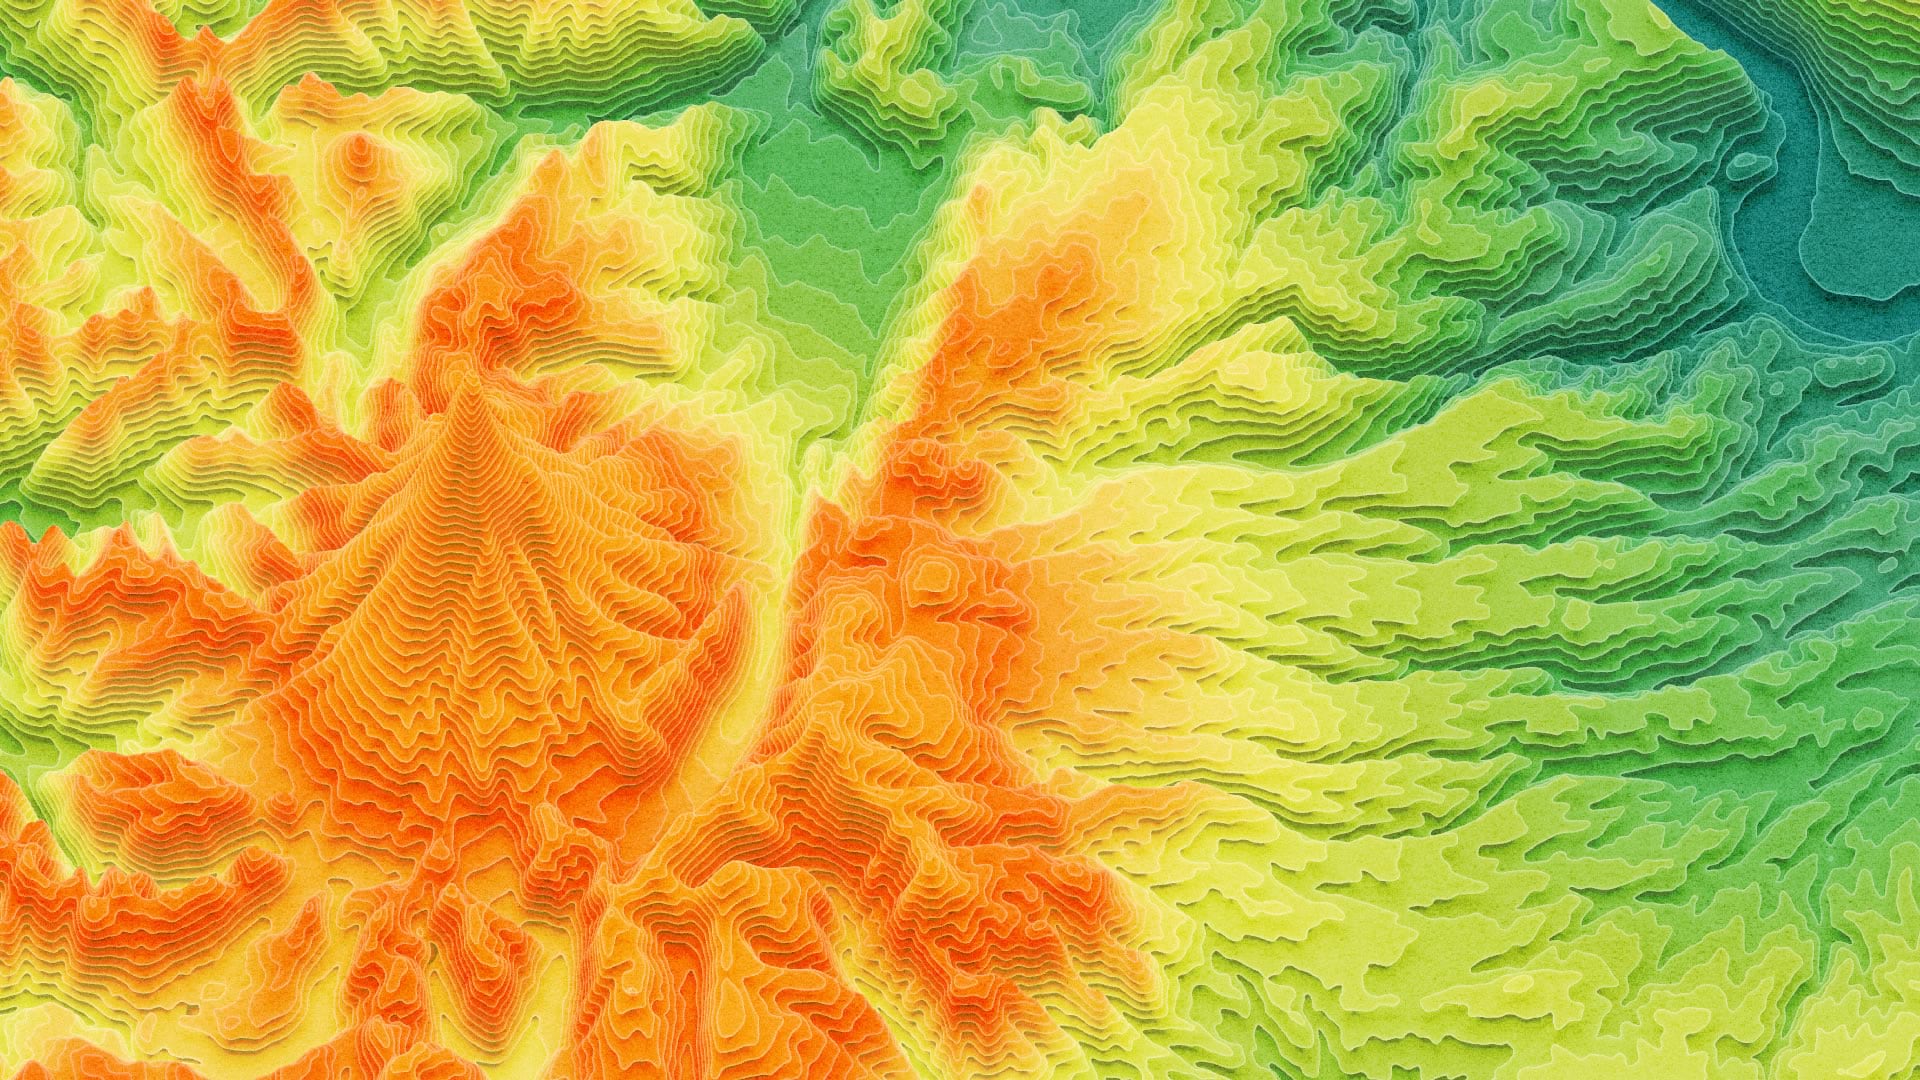 Isometric contours in ArcGIS Pro. Click to embiggen.